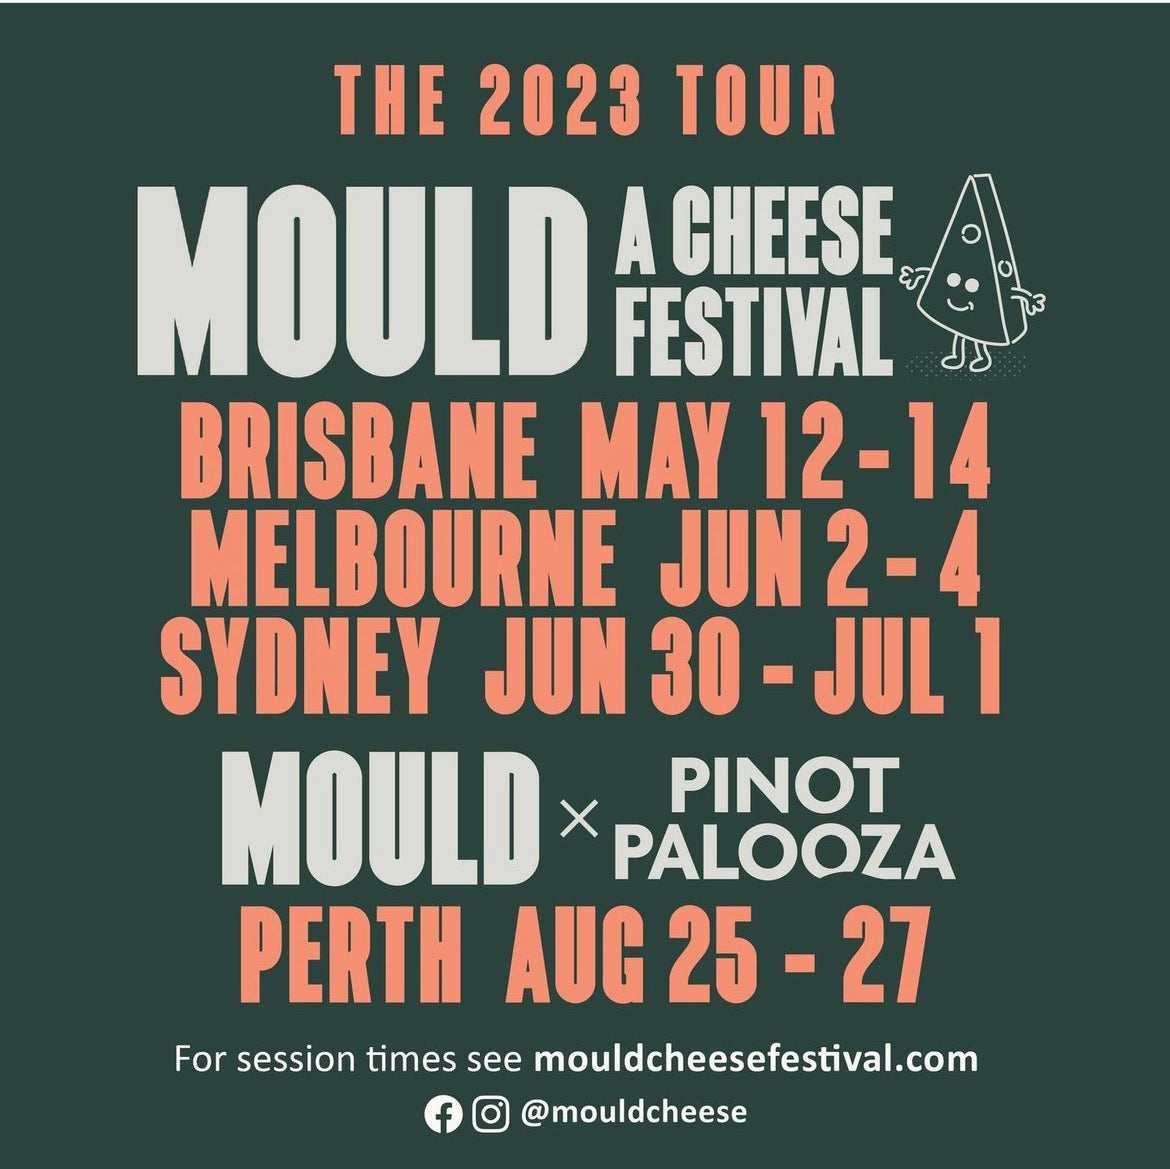 HEY TOMORROW AT MOULD CHEESE FESTIVAL